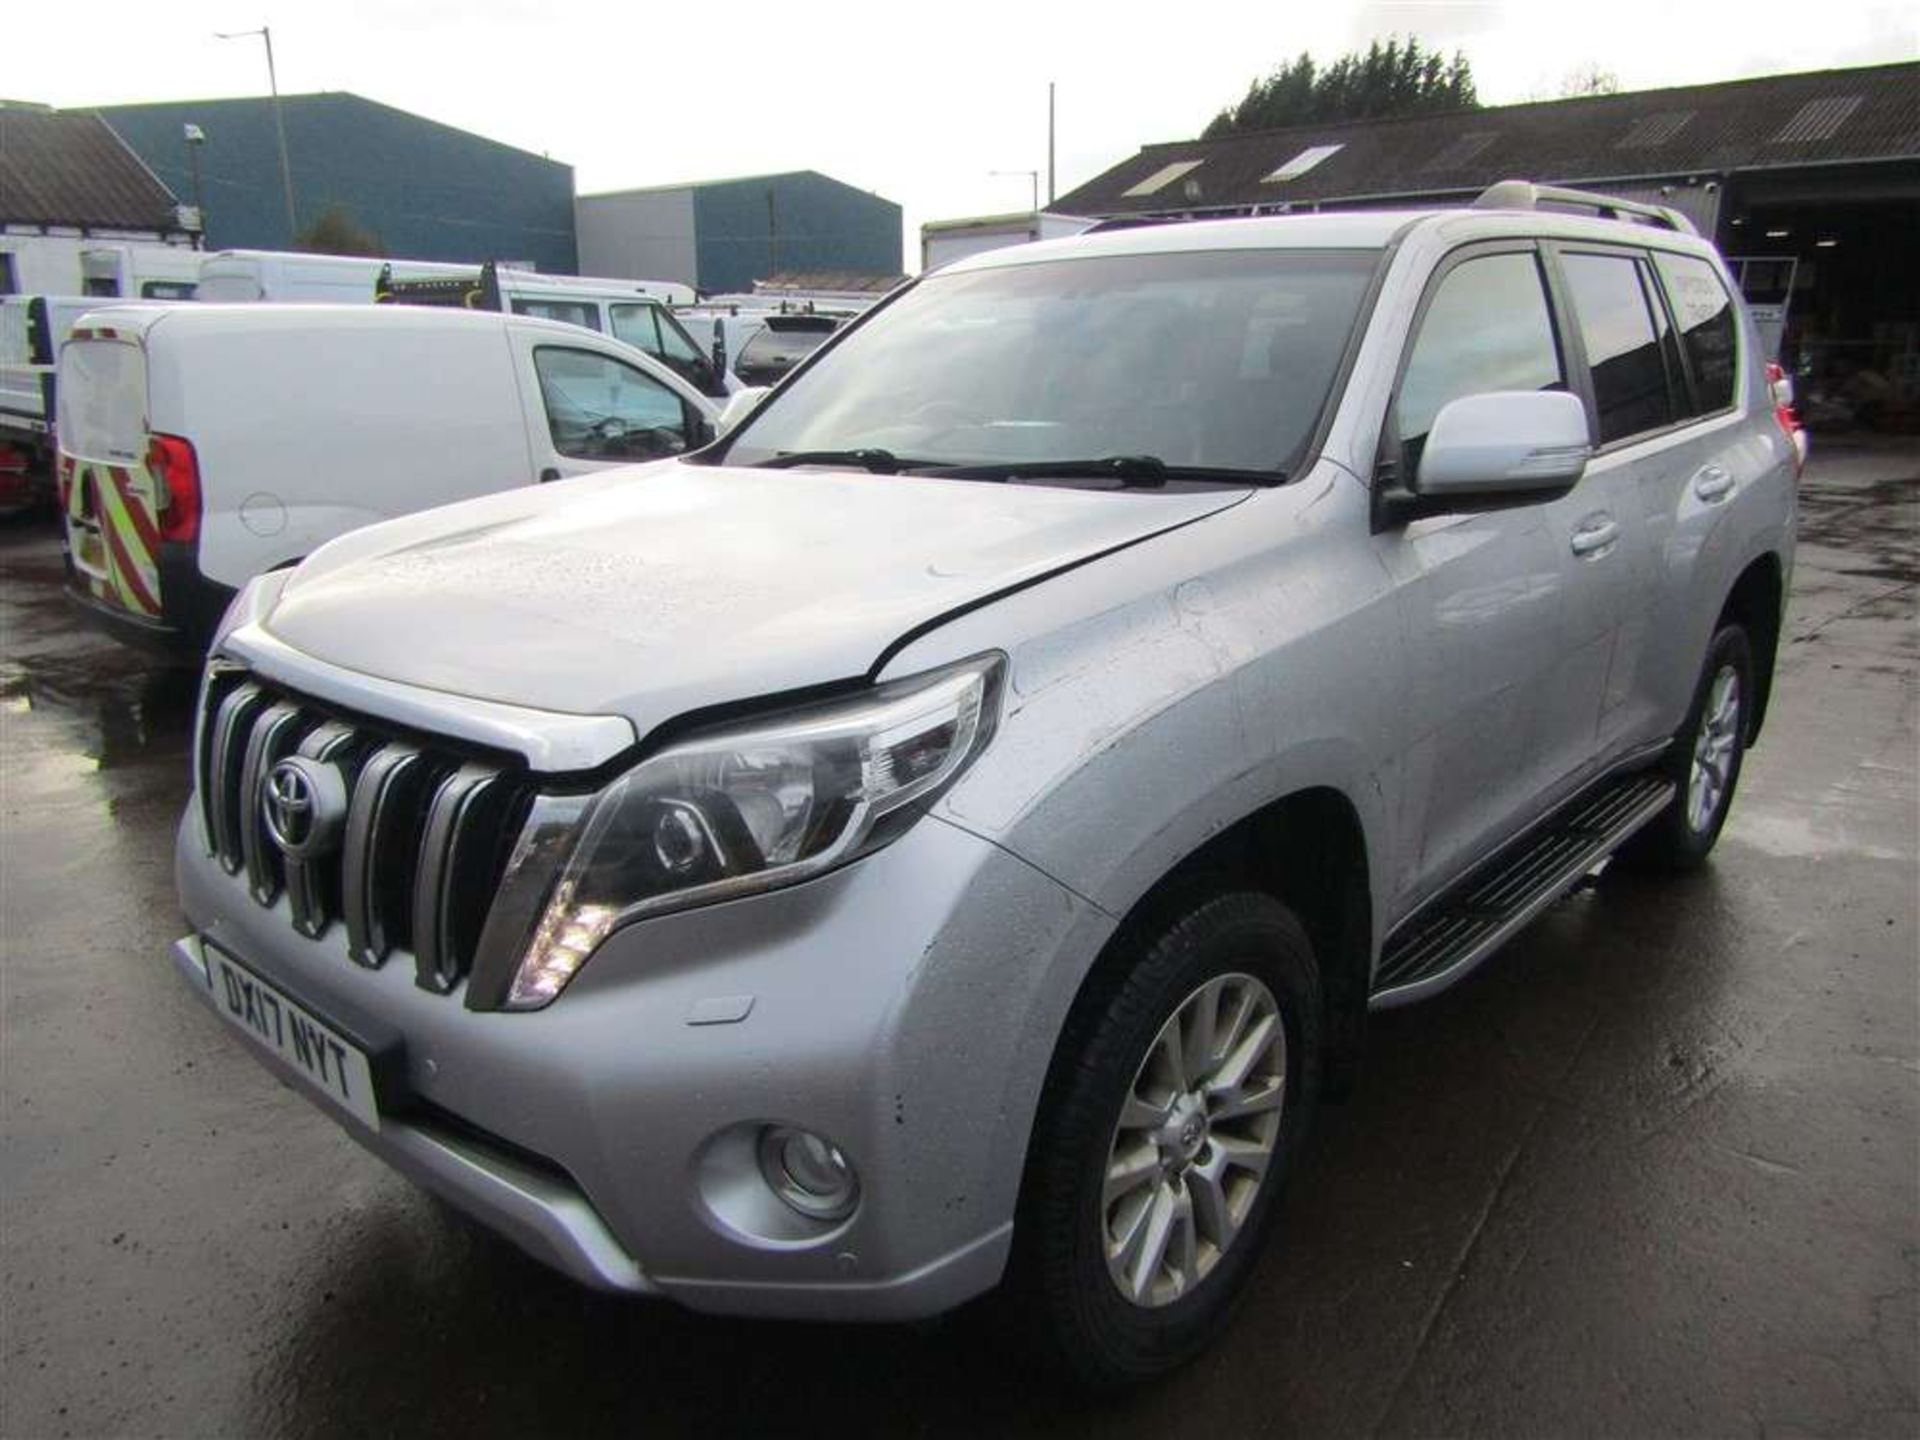 2017 17 reg Toyota Land Cruiser Icon D-4D Auto (Direct Council) - Image 2 of 5